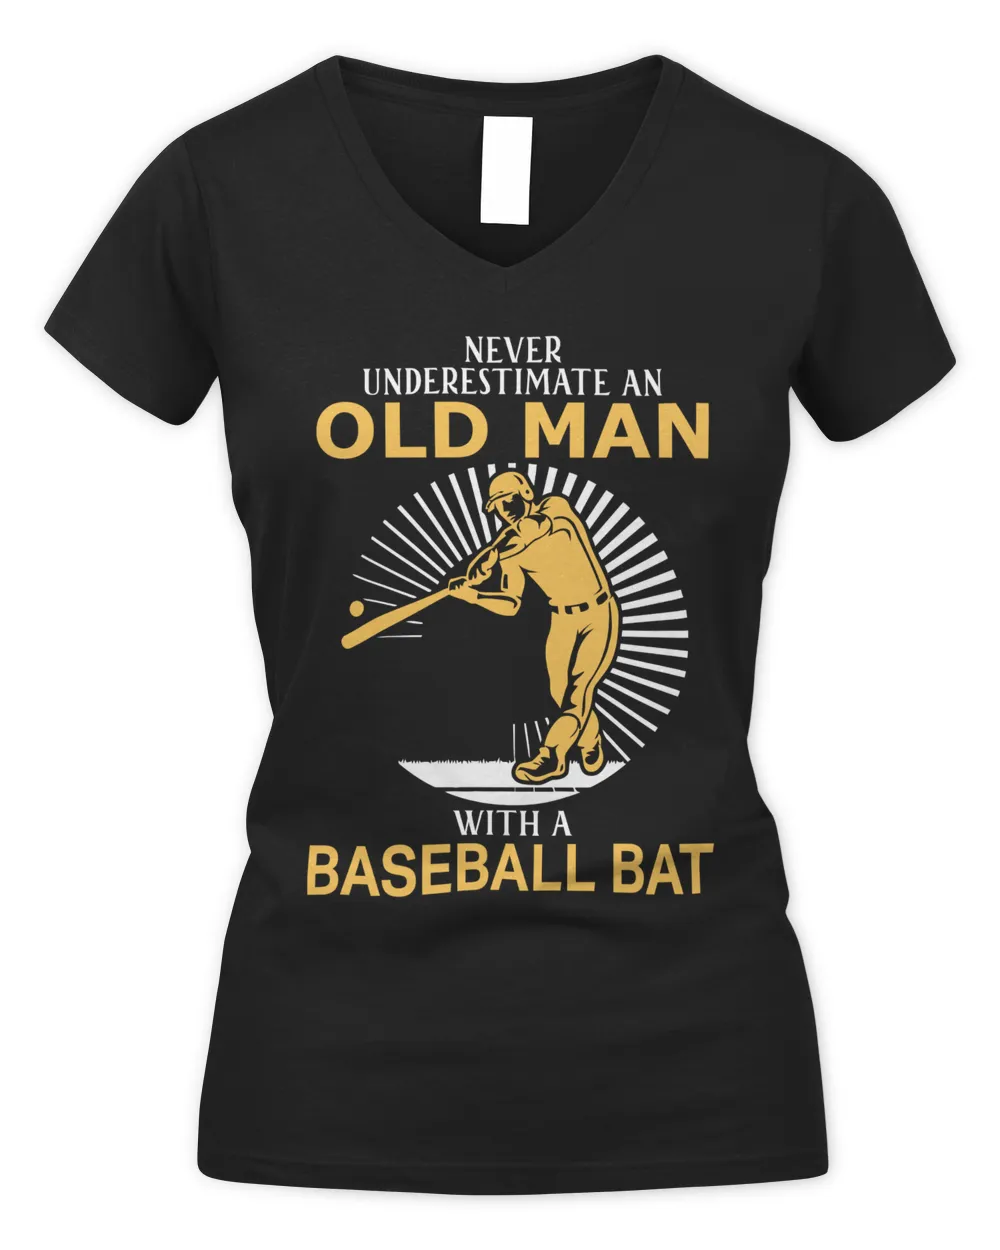 Never underestimate an old man with a baseball bat